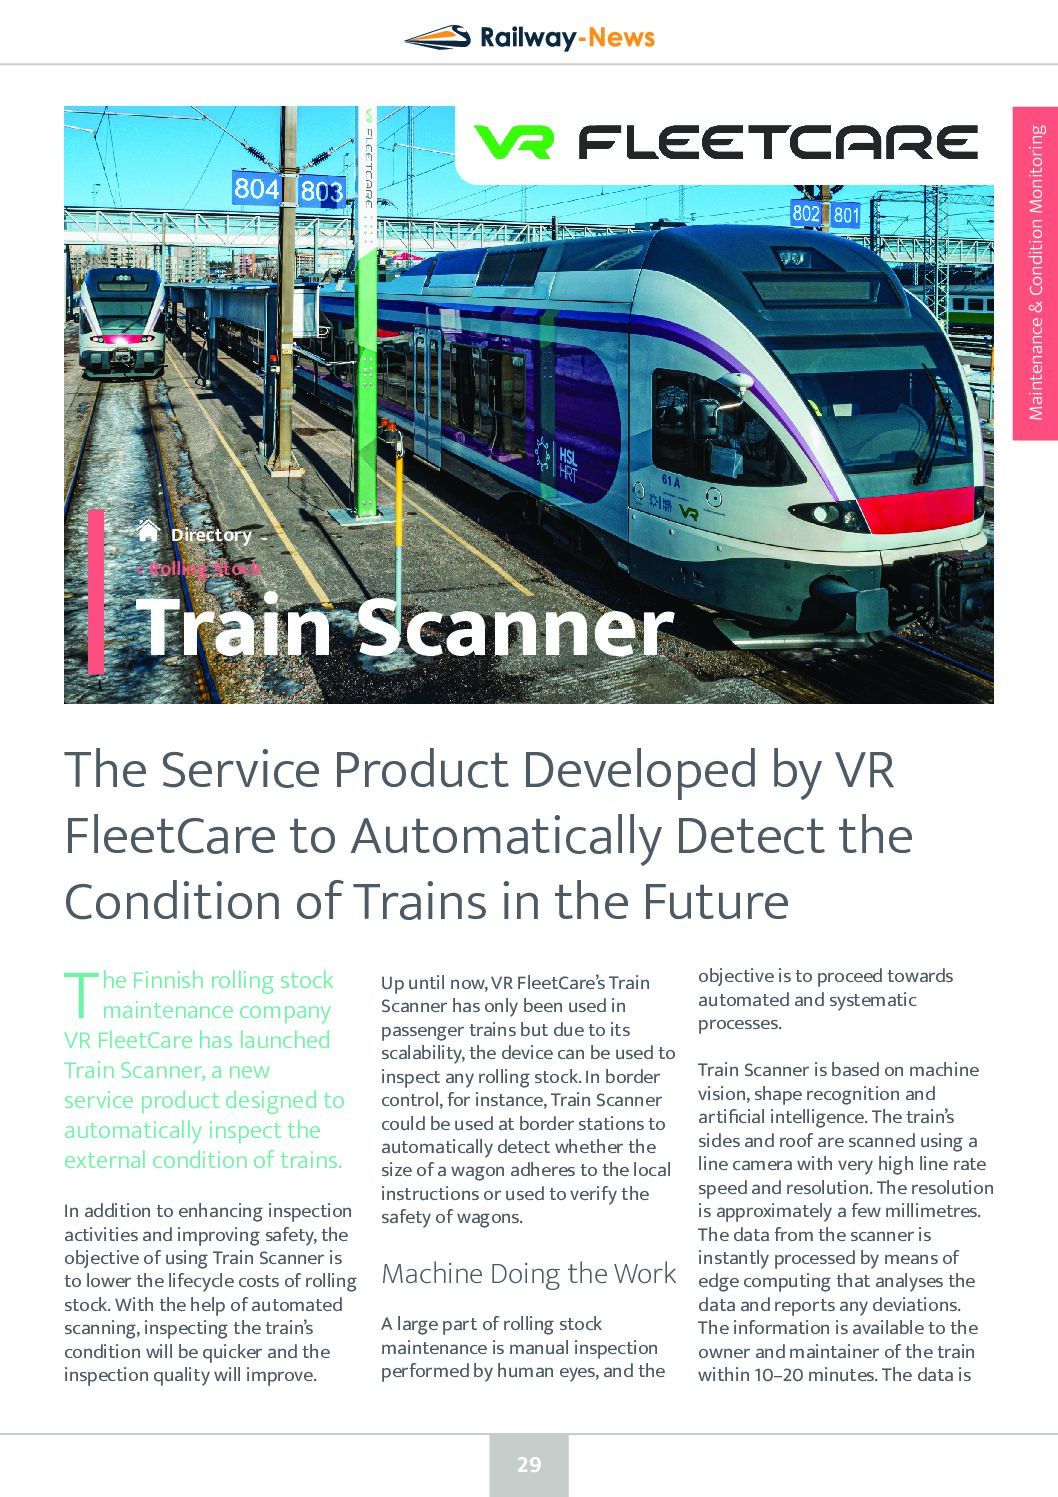 VR FleetCare Launches Train Scanner for Condition Monitoring